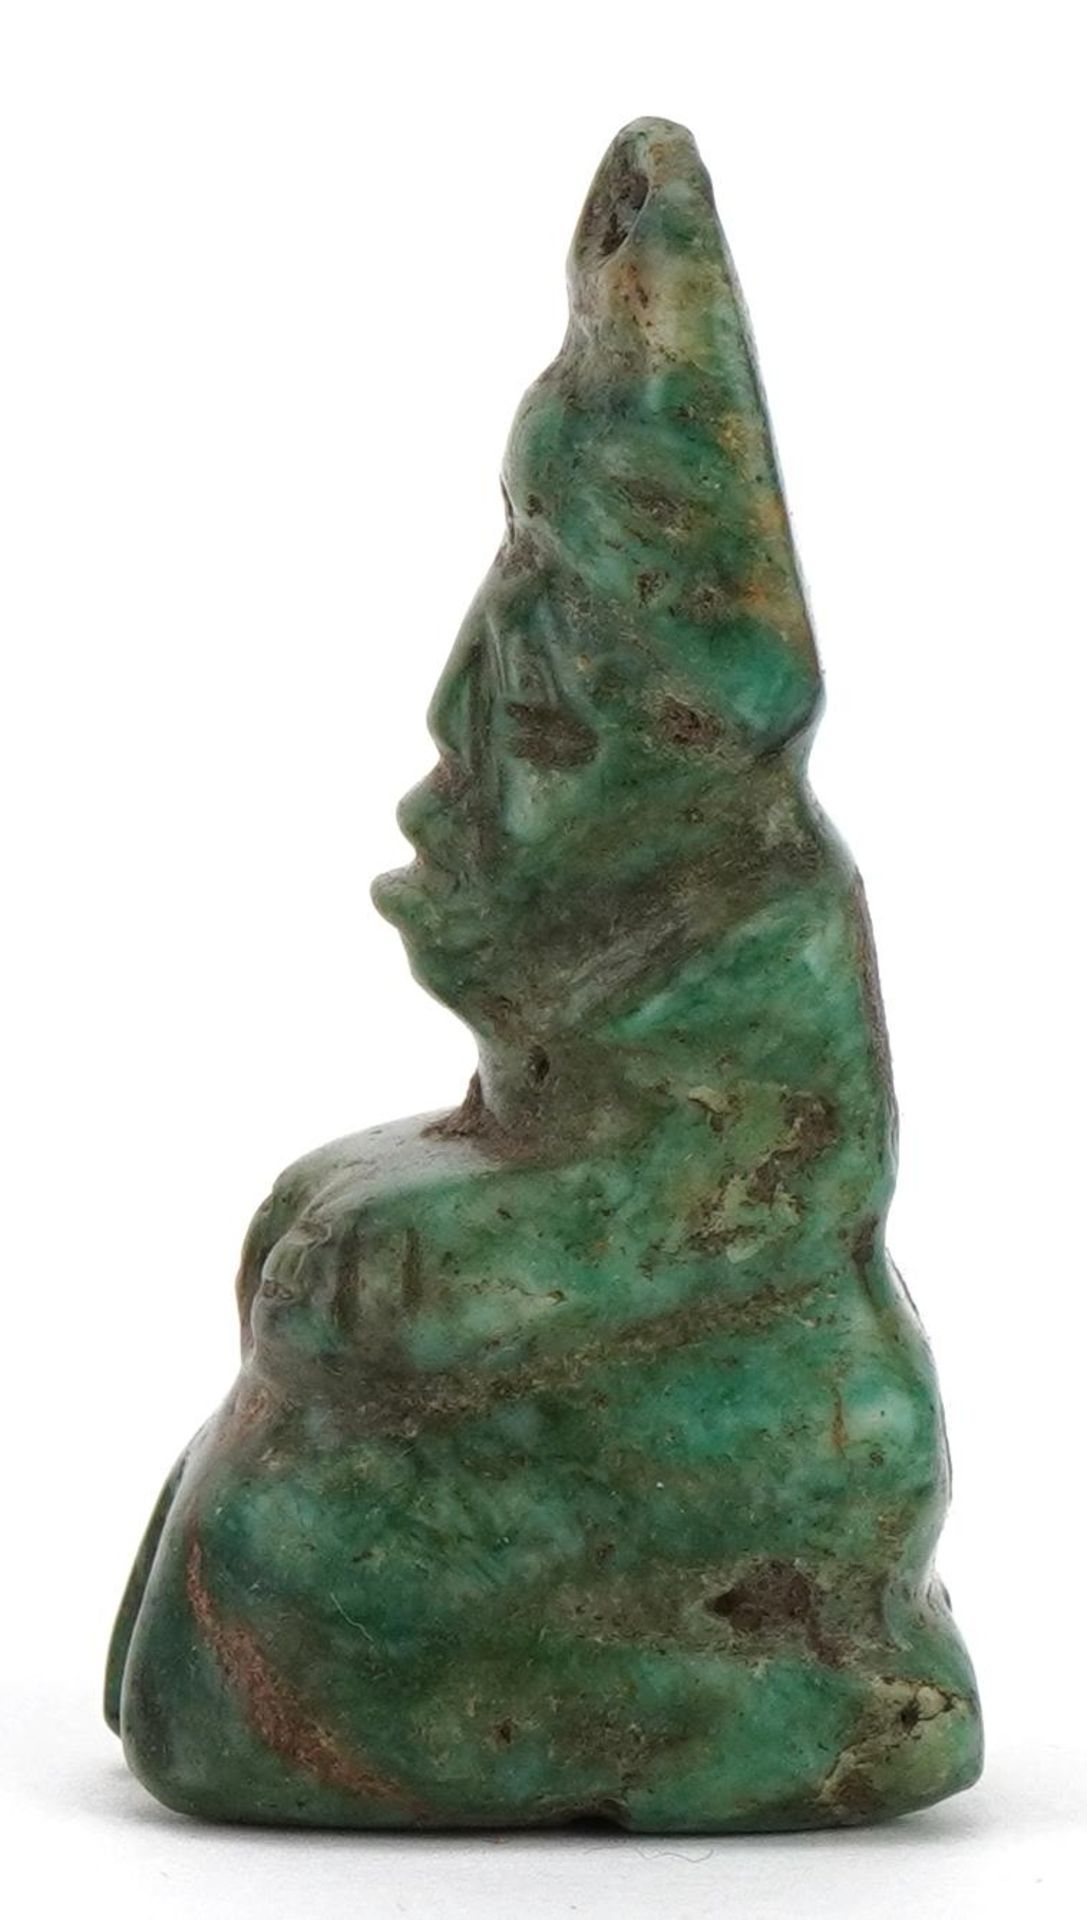 Tribal interest green hardstone figural pendant, probably Mayan or pre Columbian, 4.5cm high : For - Image 5 of 7